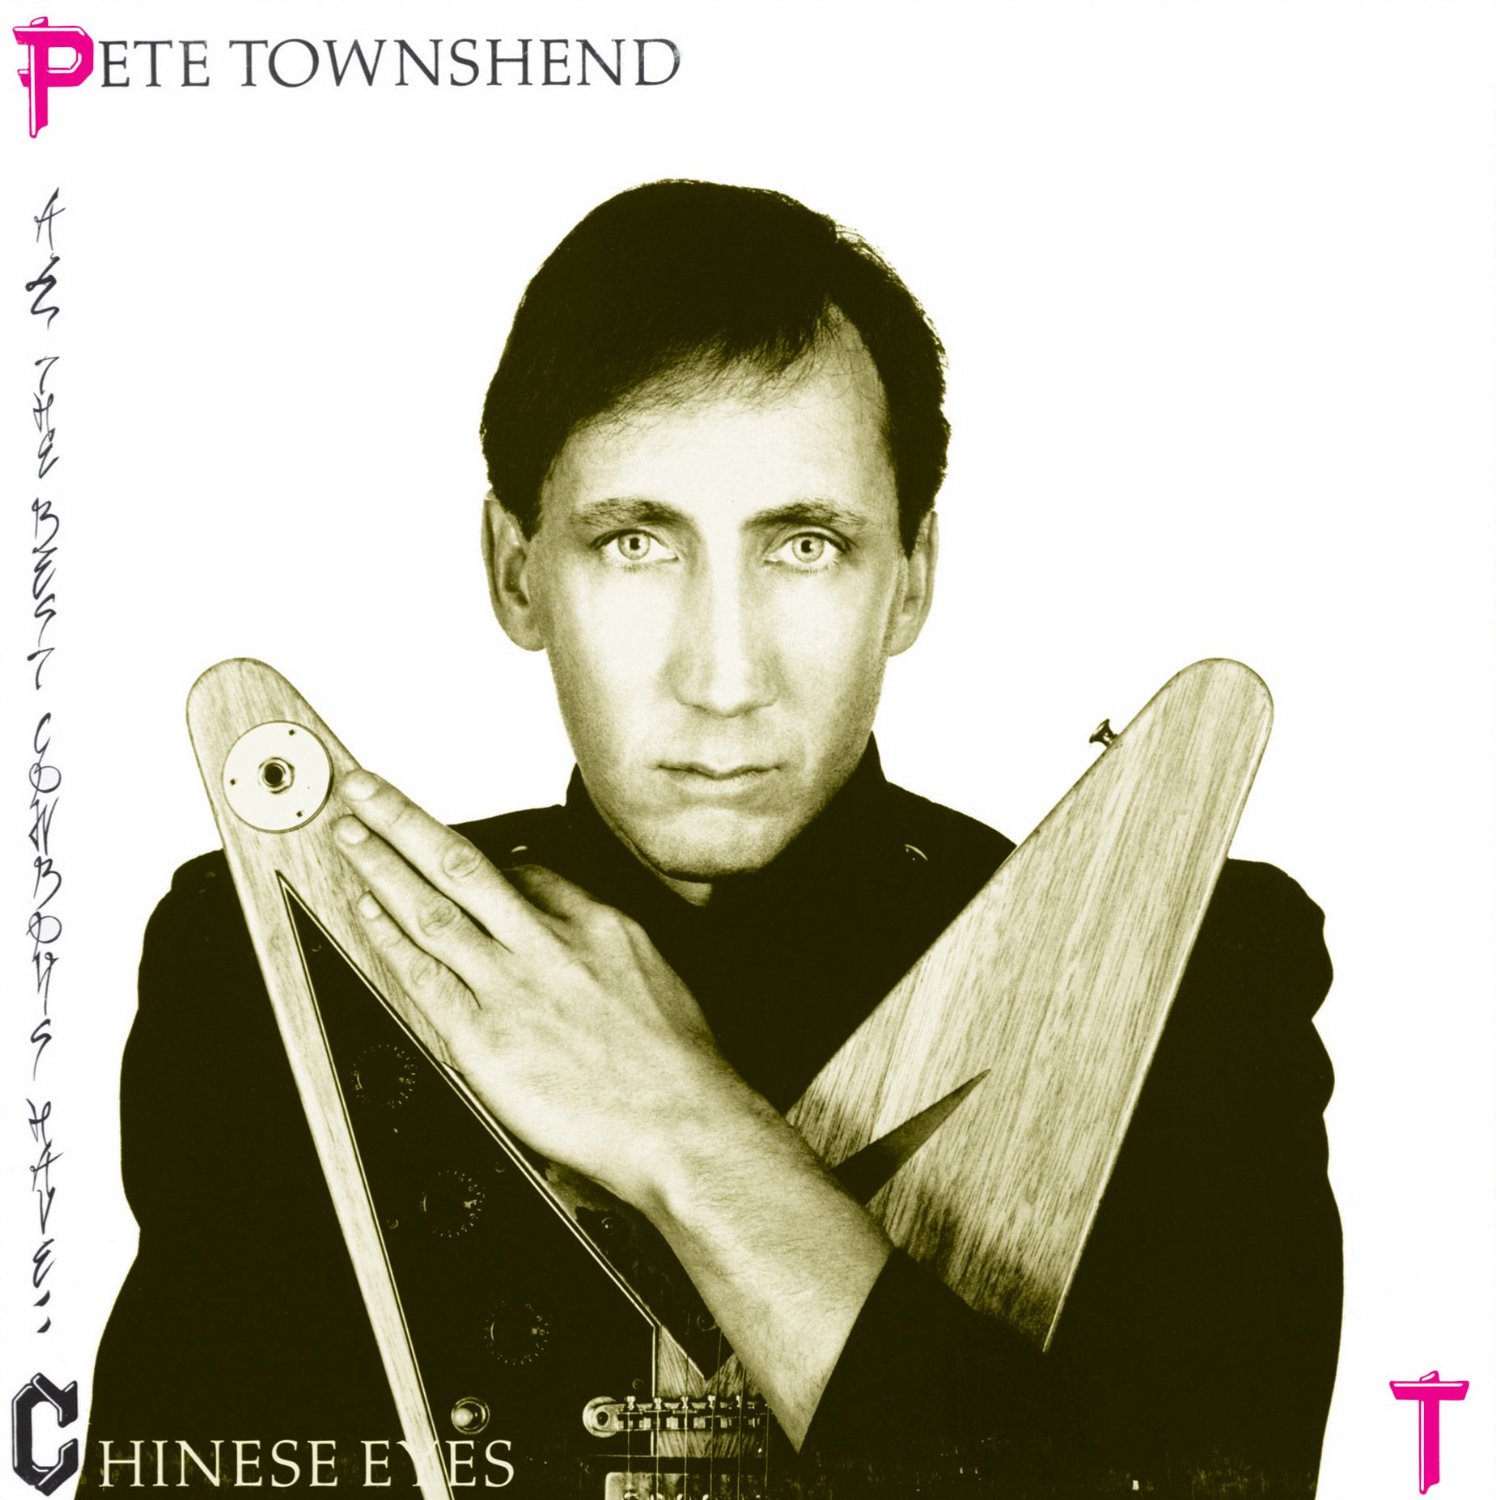 Pete Townshend All the best cowboys have chinese eyes